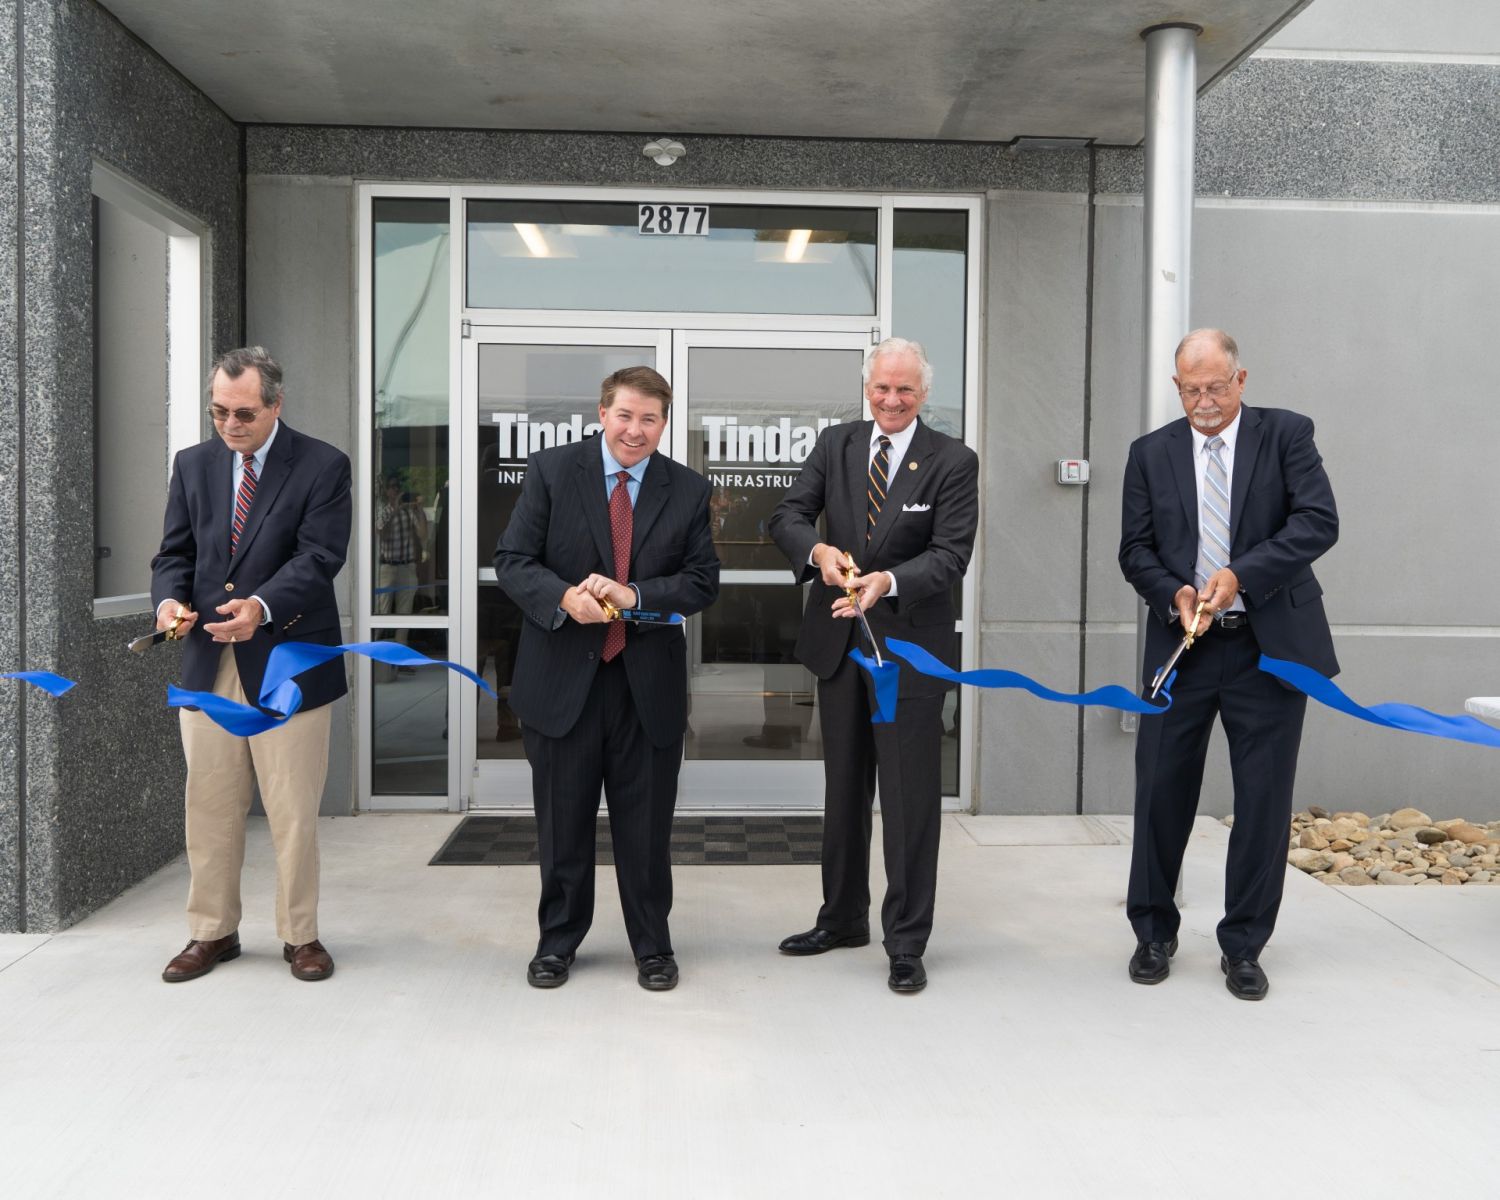 Tindall Grand Opening 4: McMaster and company officials cut the ribbon on the new utility division facility, which is expected to expand production and product lines through a $27.9 million capital investment. (Photo/Provided)